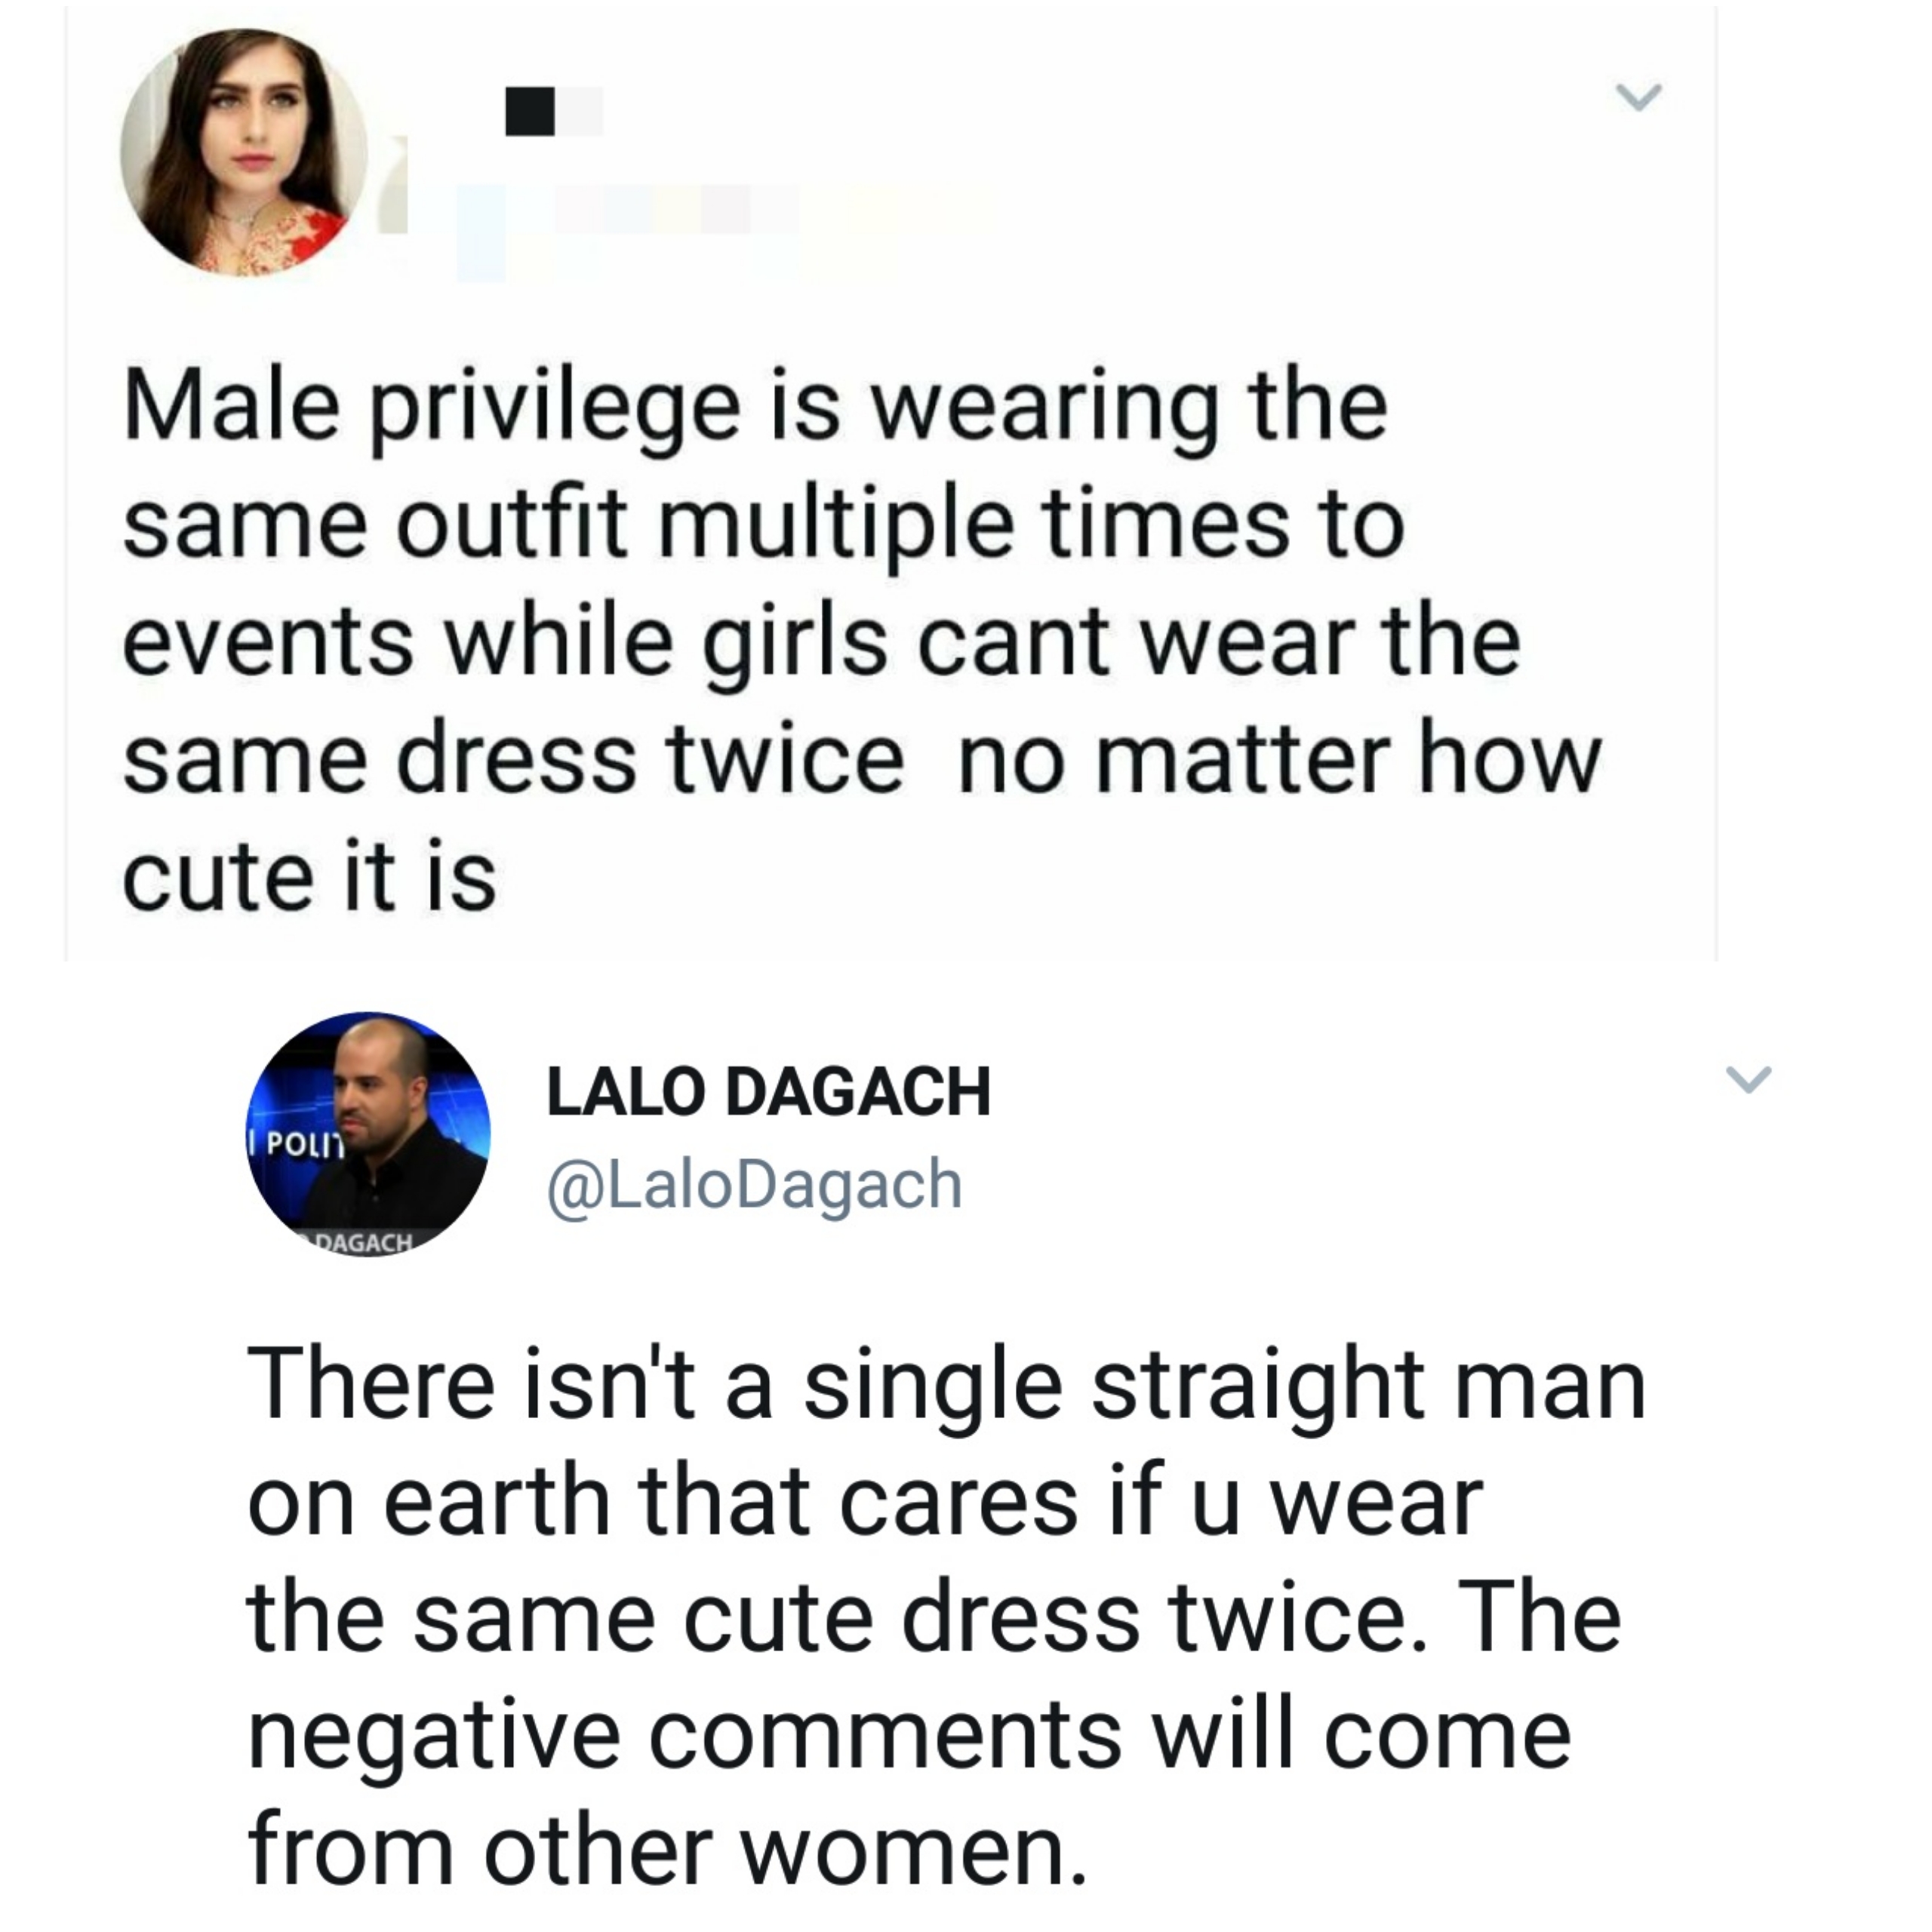 women are so stupid - Male privilege is wearing the same outfit multiple times to events while girls cant wear the same dress twice no matter how cute it is Pol Lalo Dagach Dagach There isn't a single straight man on earth that cares if u wear the same cu